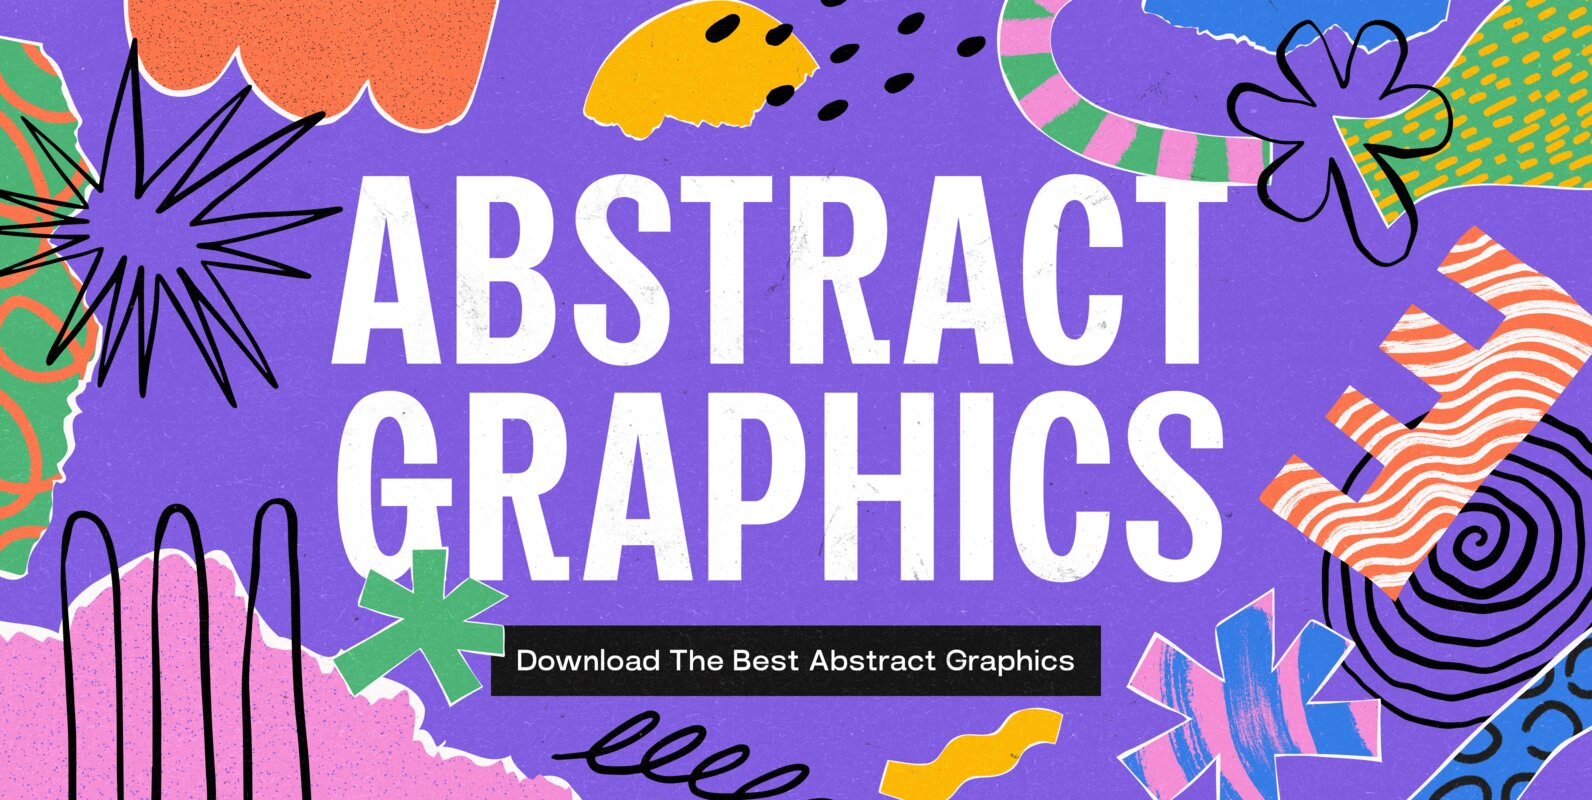 Explore The Best Abstract Stock Graphics